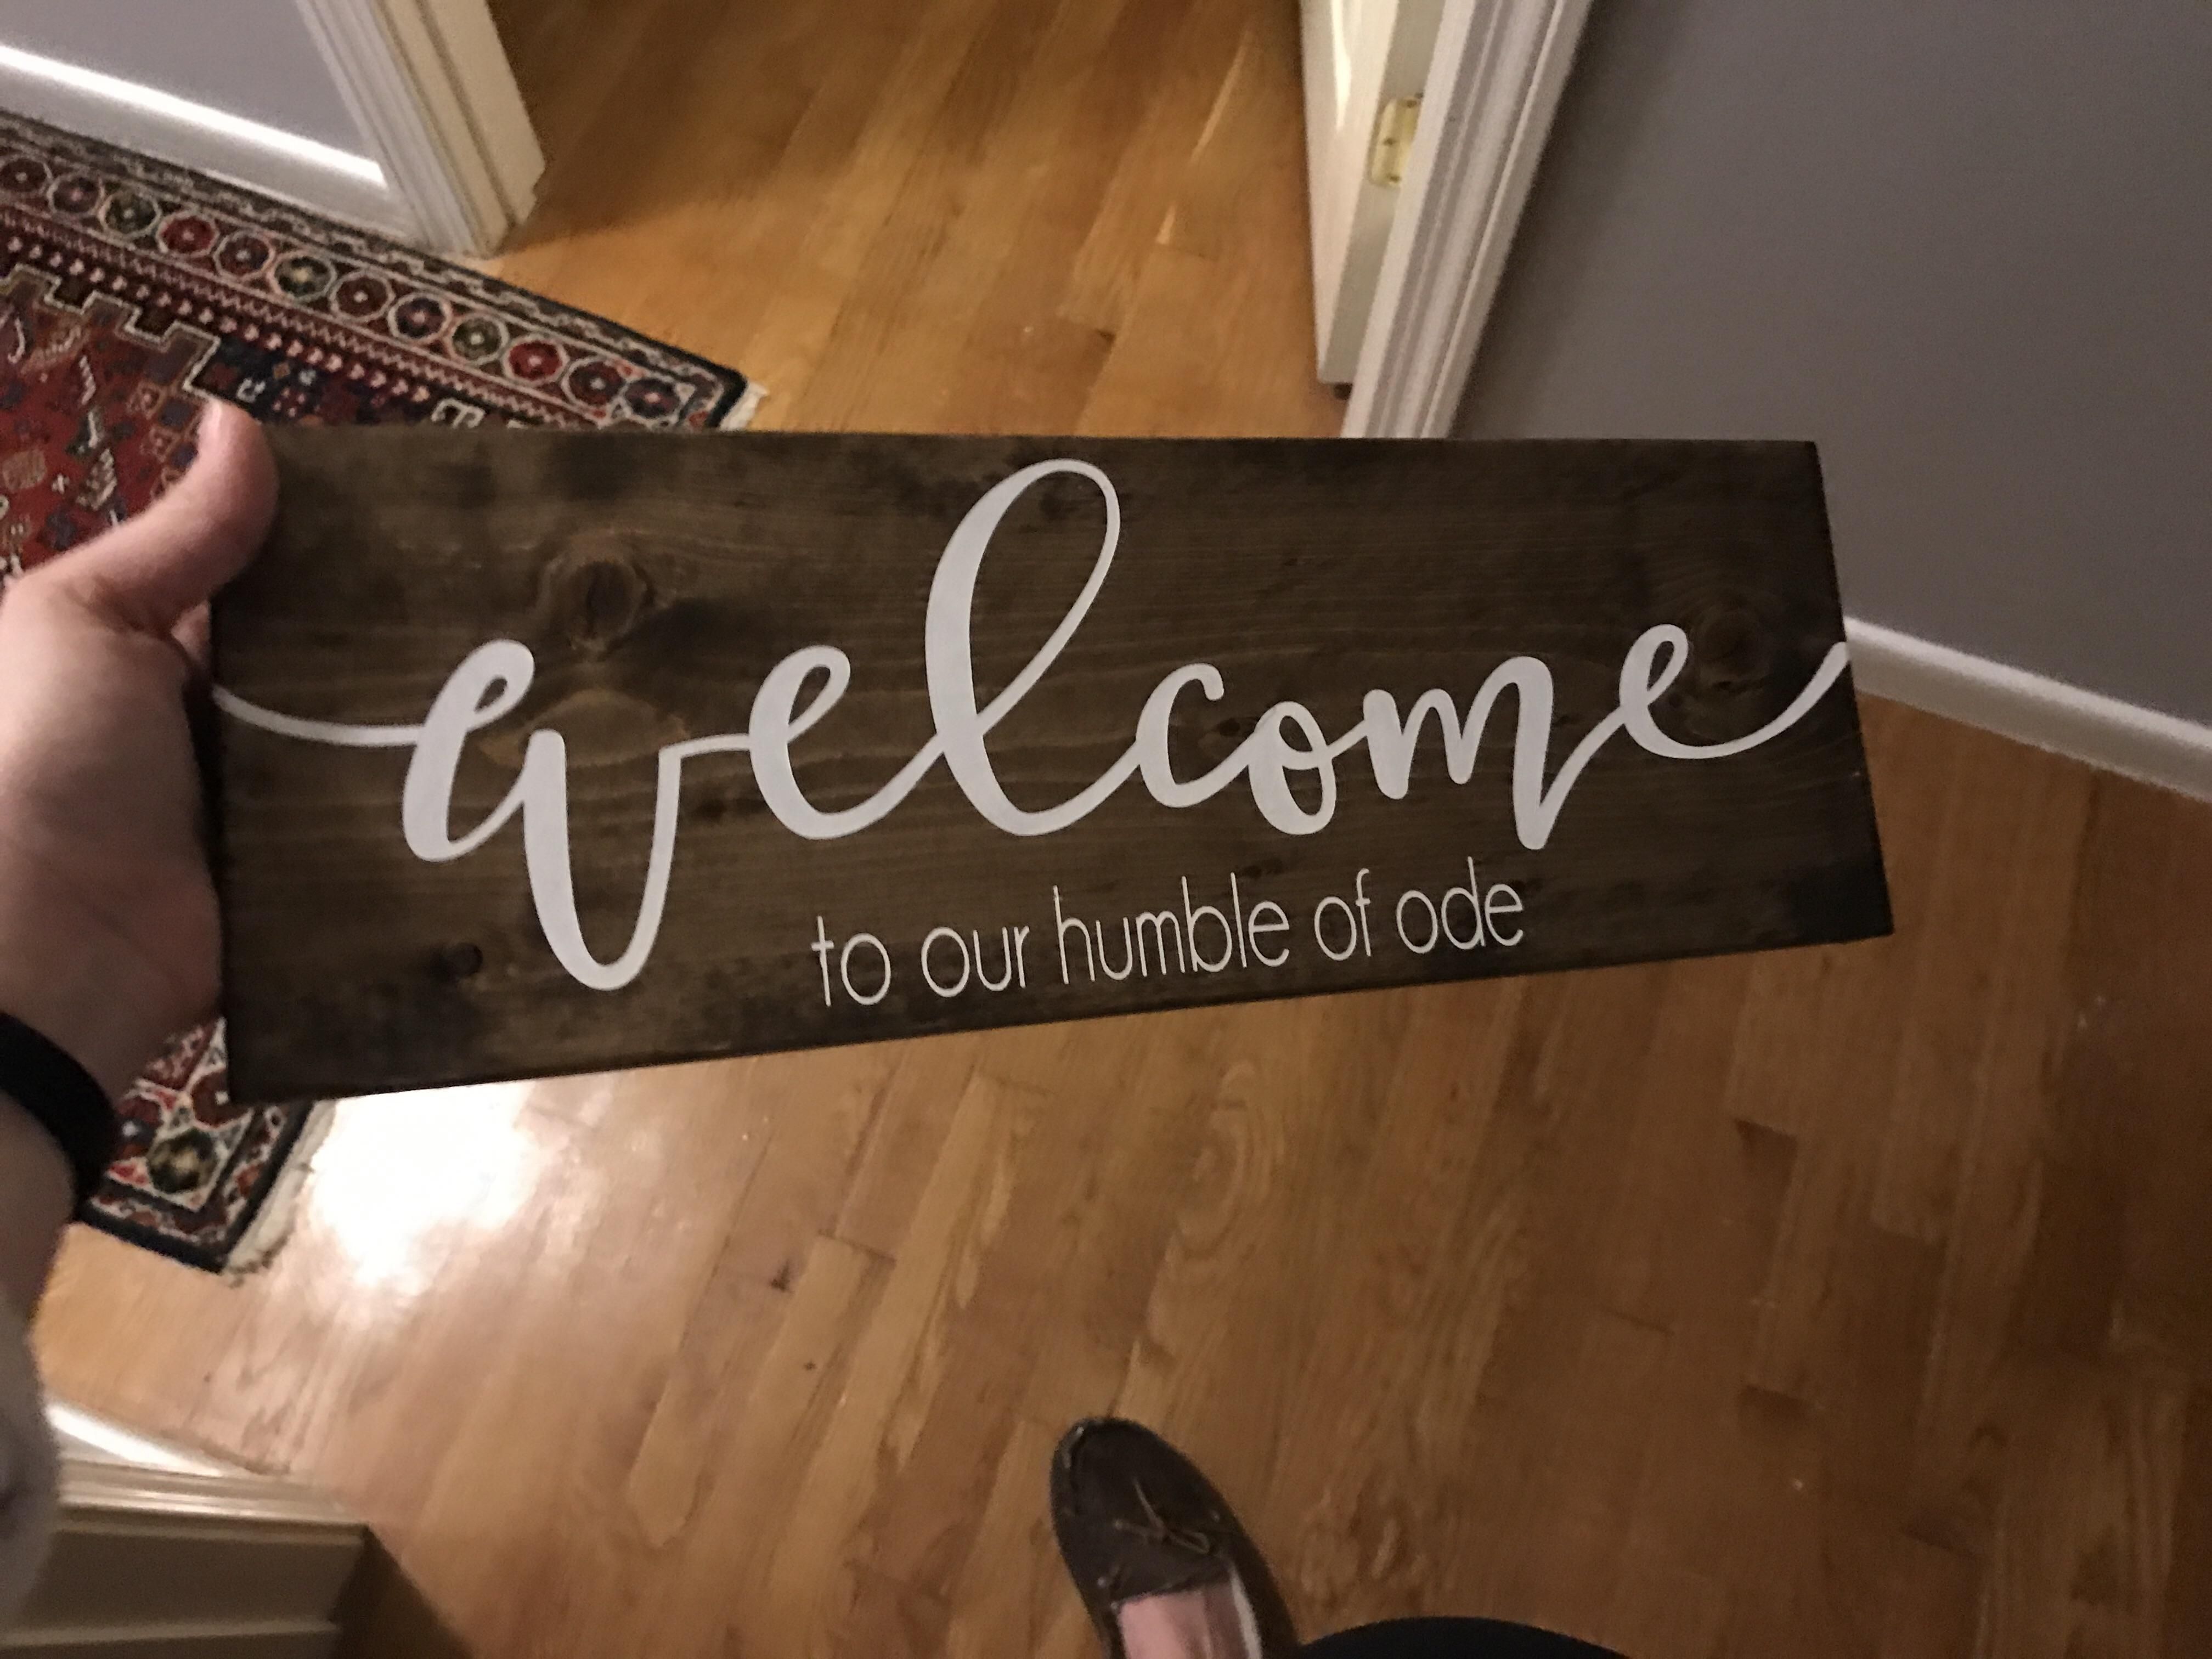 My friend once thanked me for hosting her at my "Humble of Ode" and I never plan on letting her live it down. Had this made for her new apartment